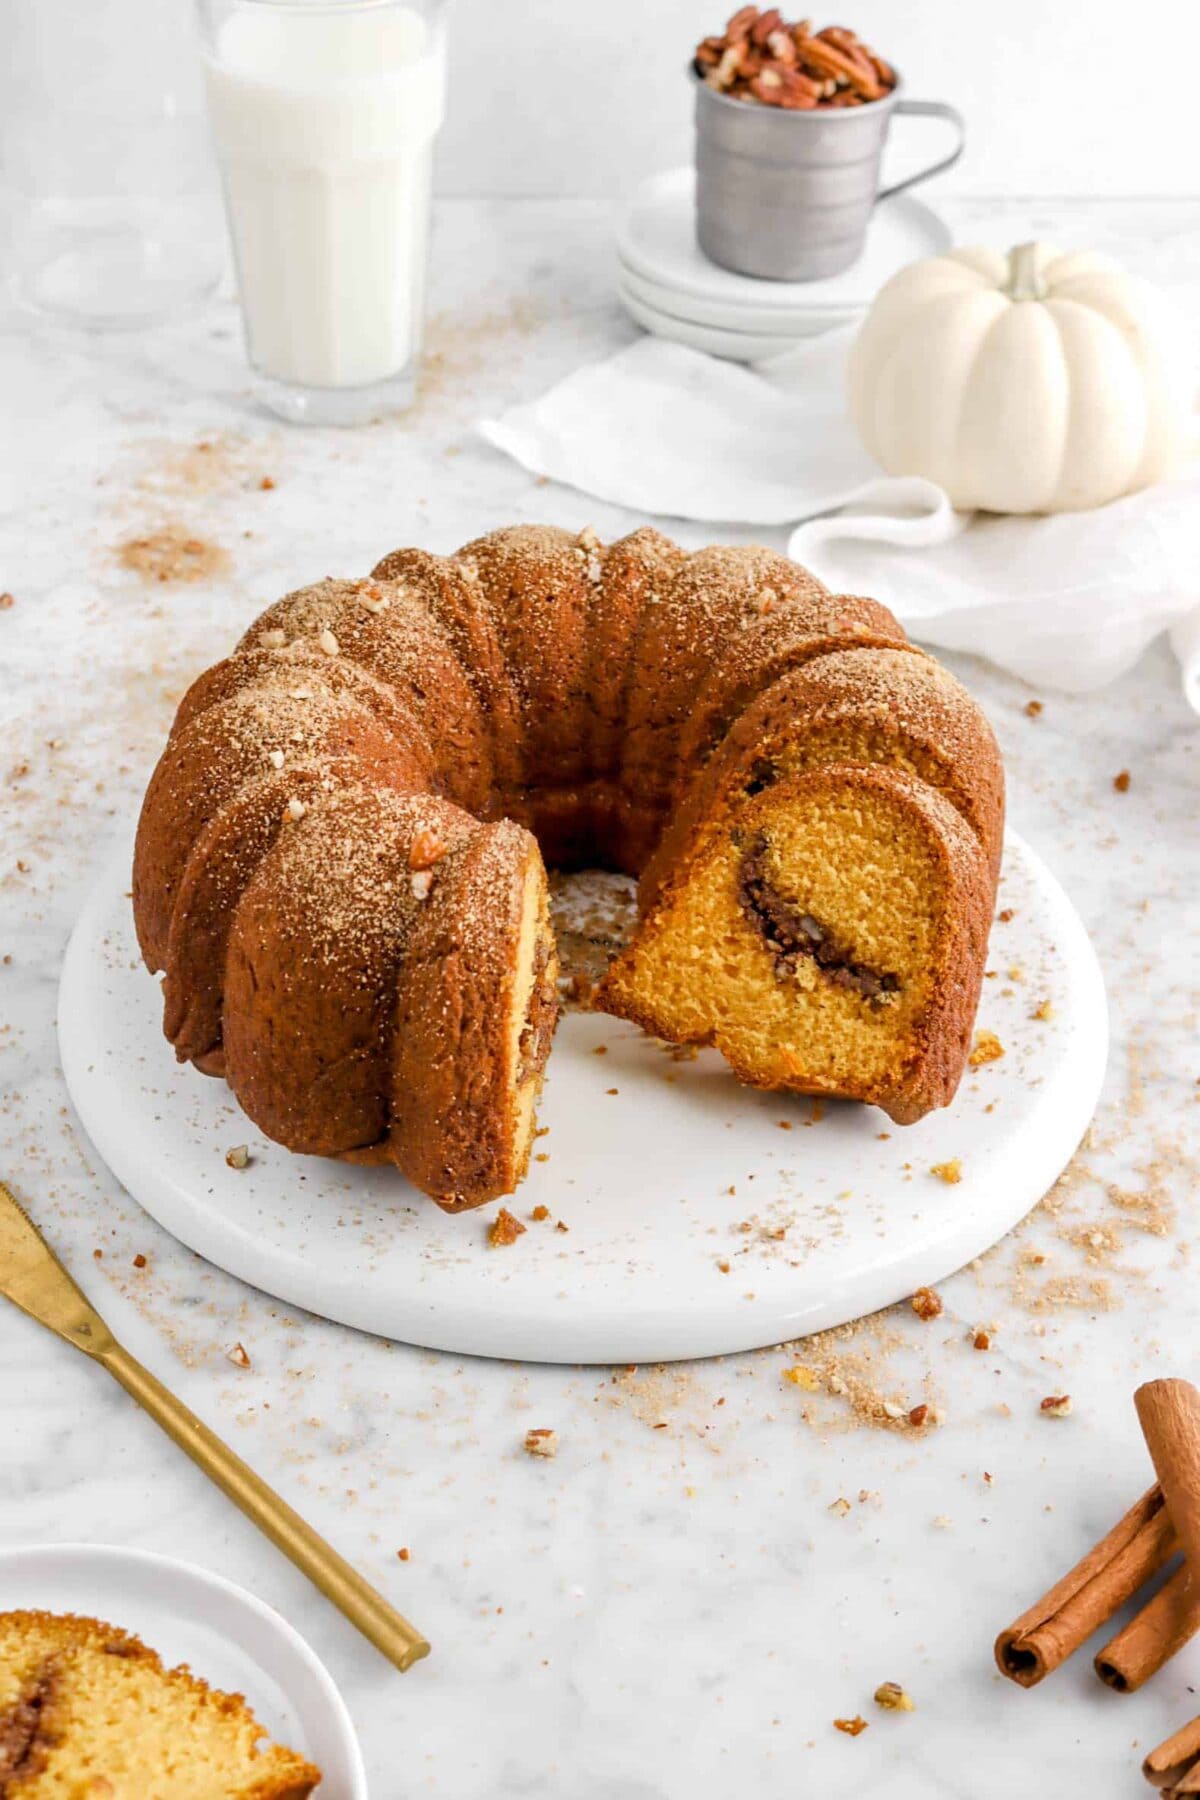 pumpkin bundt cake with glass of milk, cup of pecans, stacked plates, white napkin, and white pumpkin around